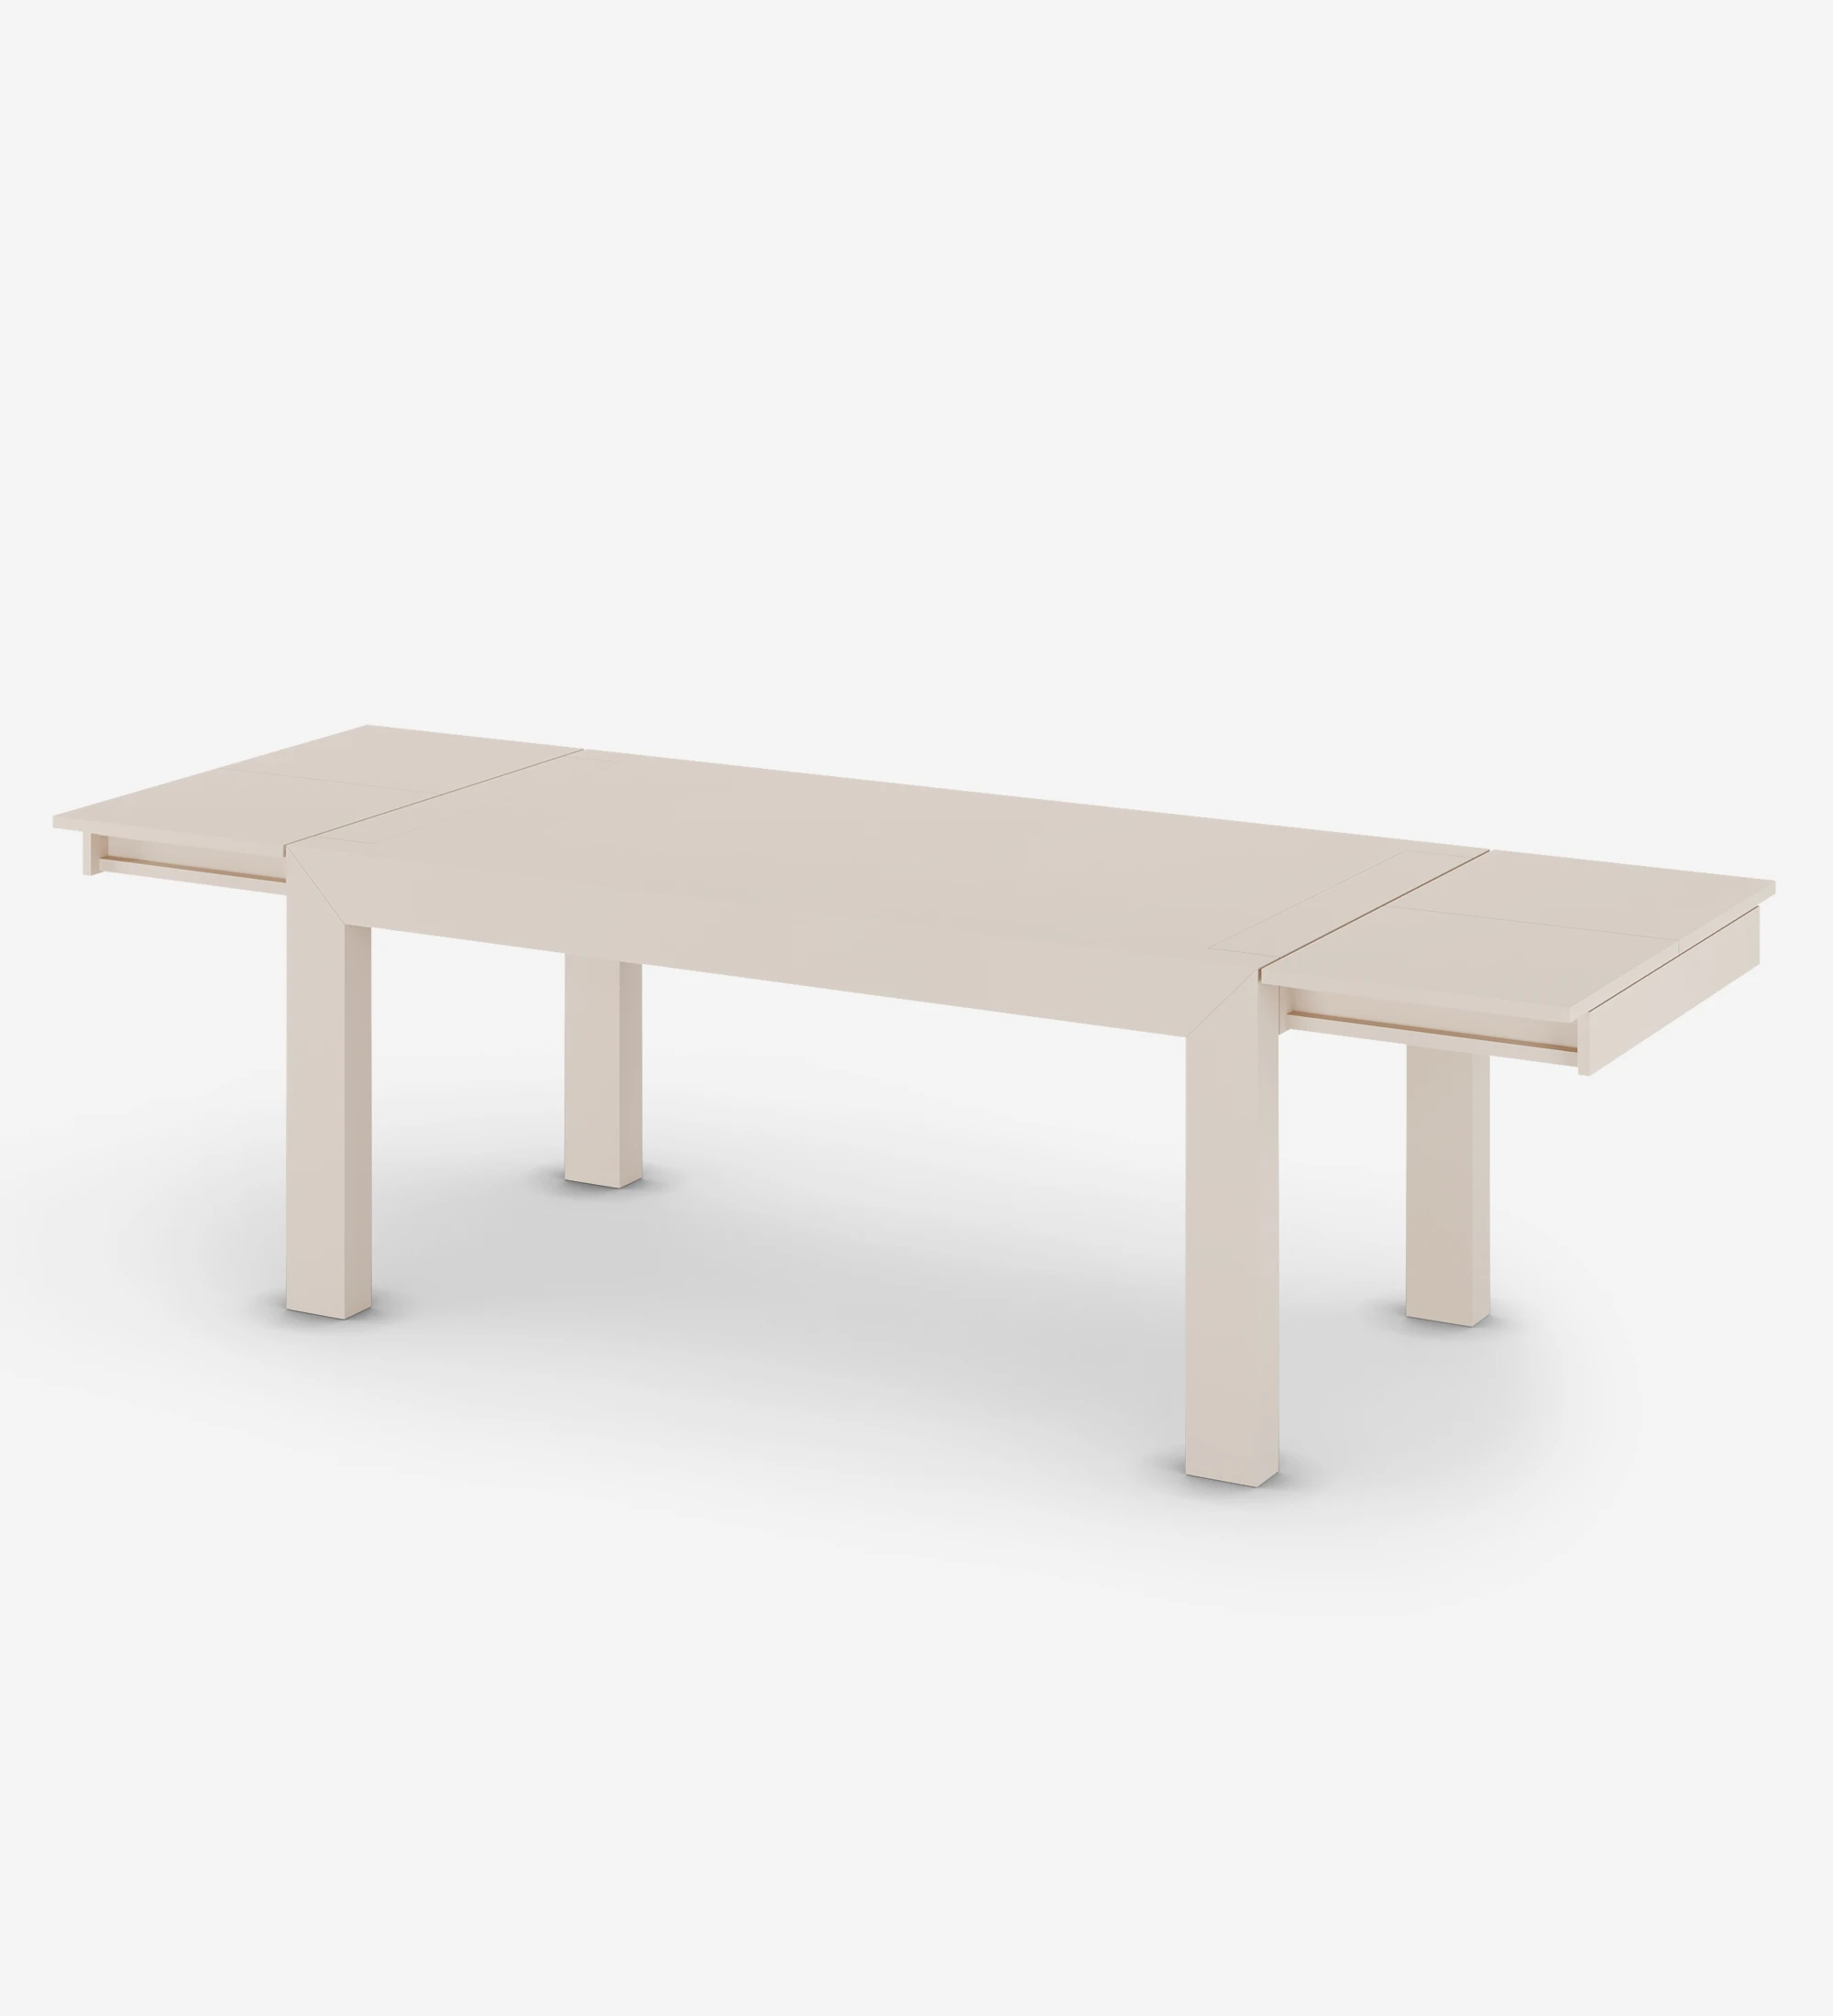 Pearl lacquered rectangular extendable dining table.